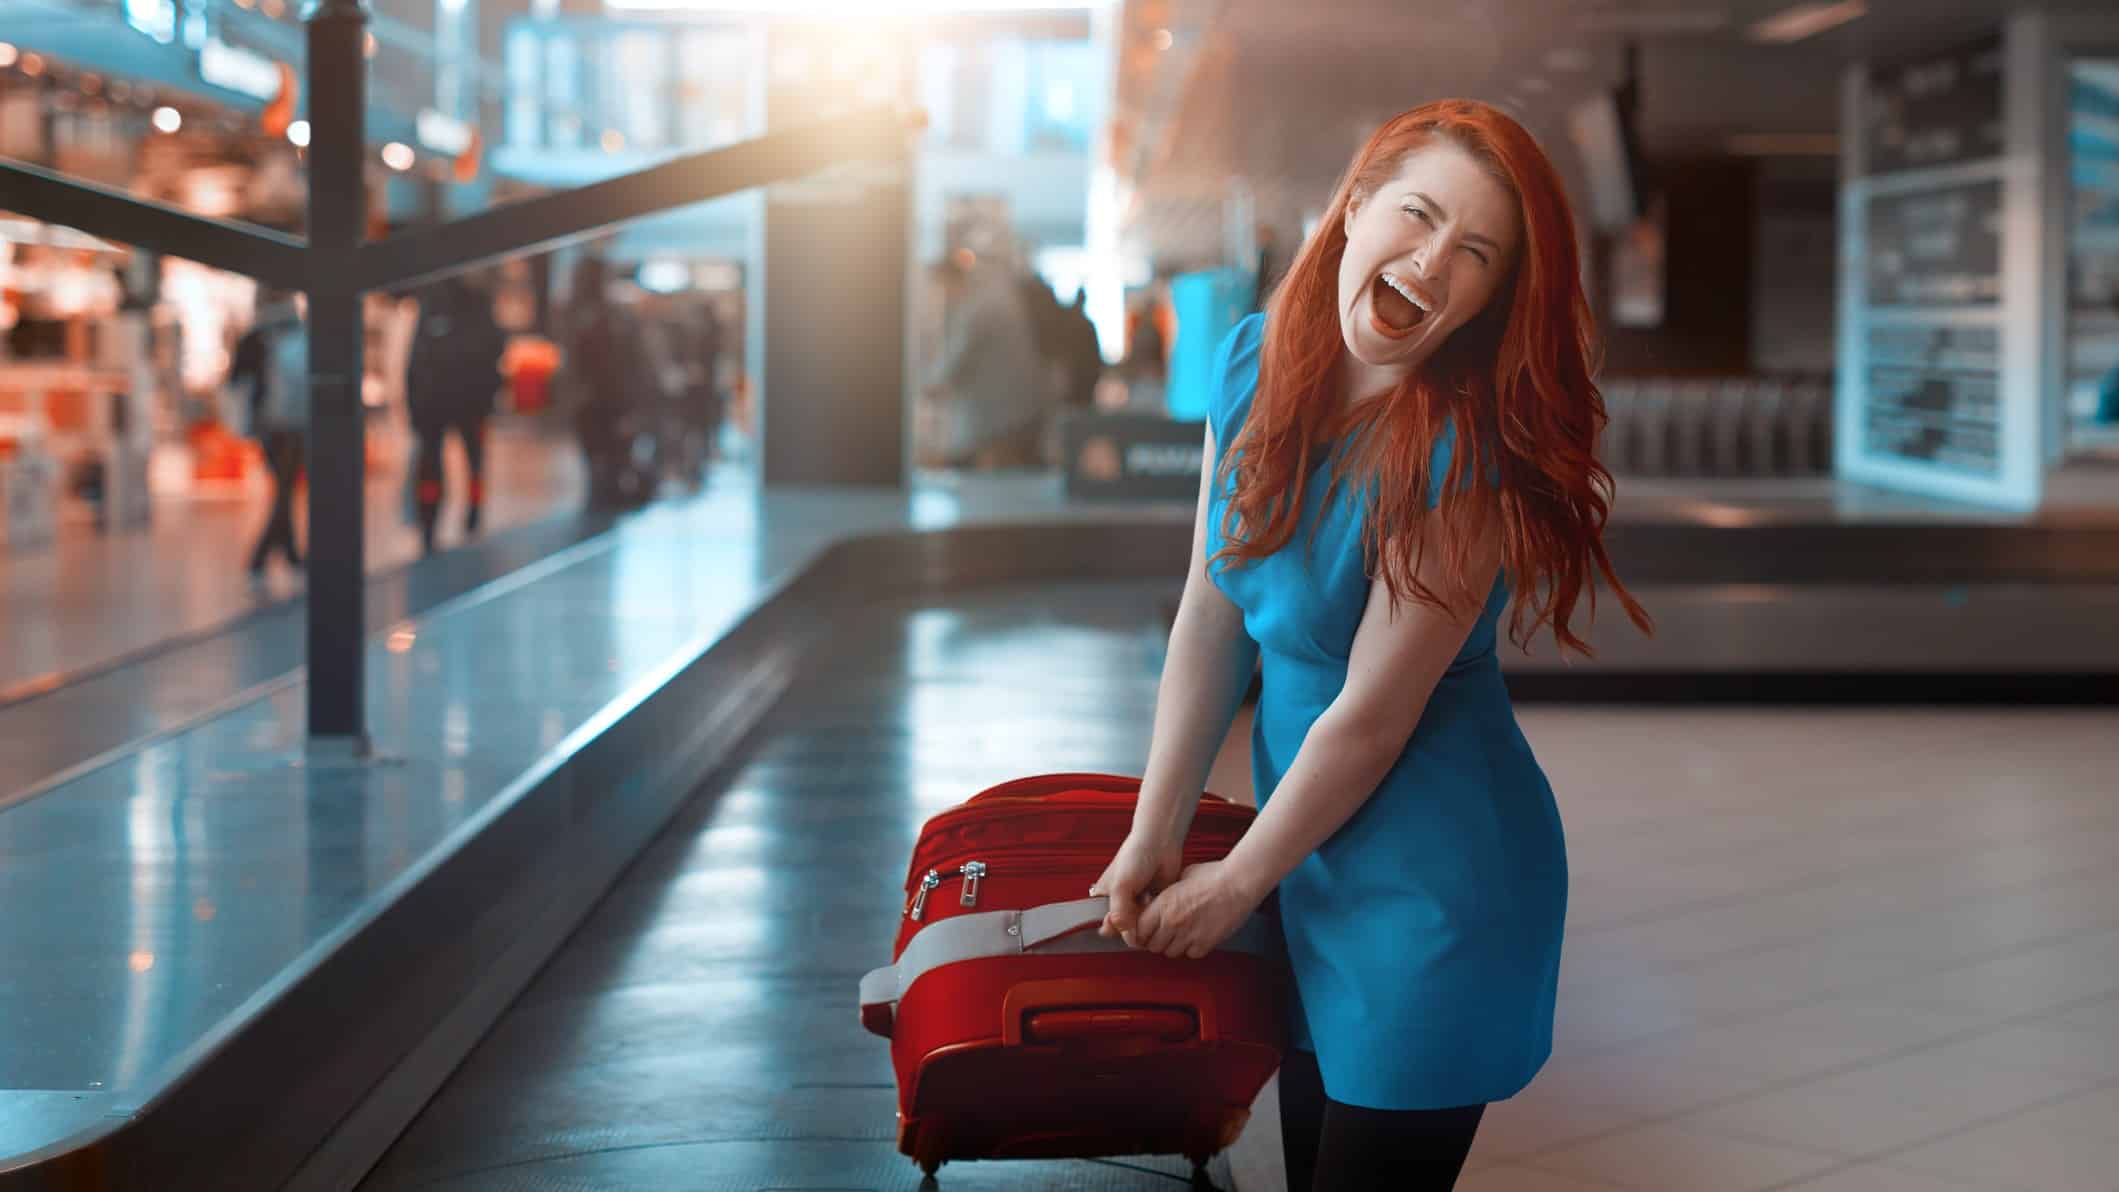 A woman is laughing with joy as she pulls her luggage off the conveyor belt at an airport.